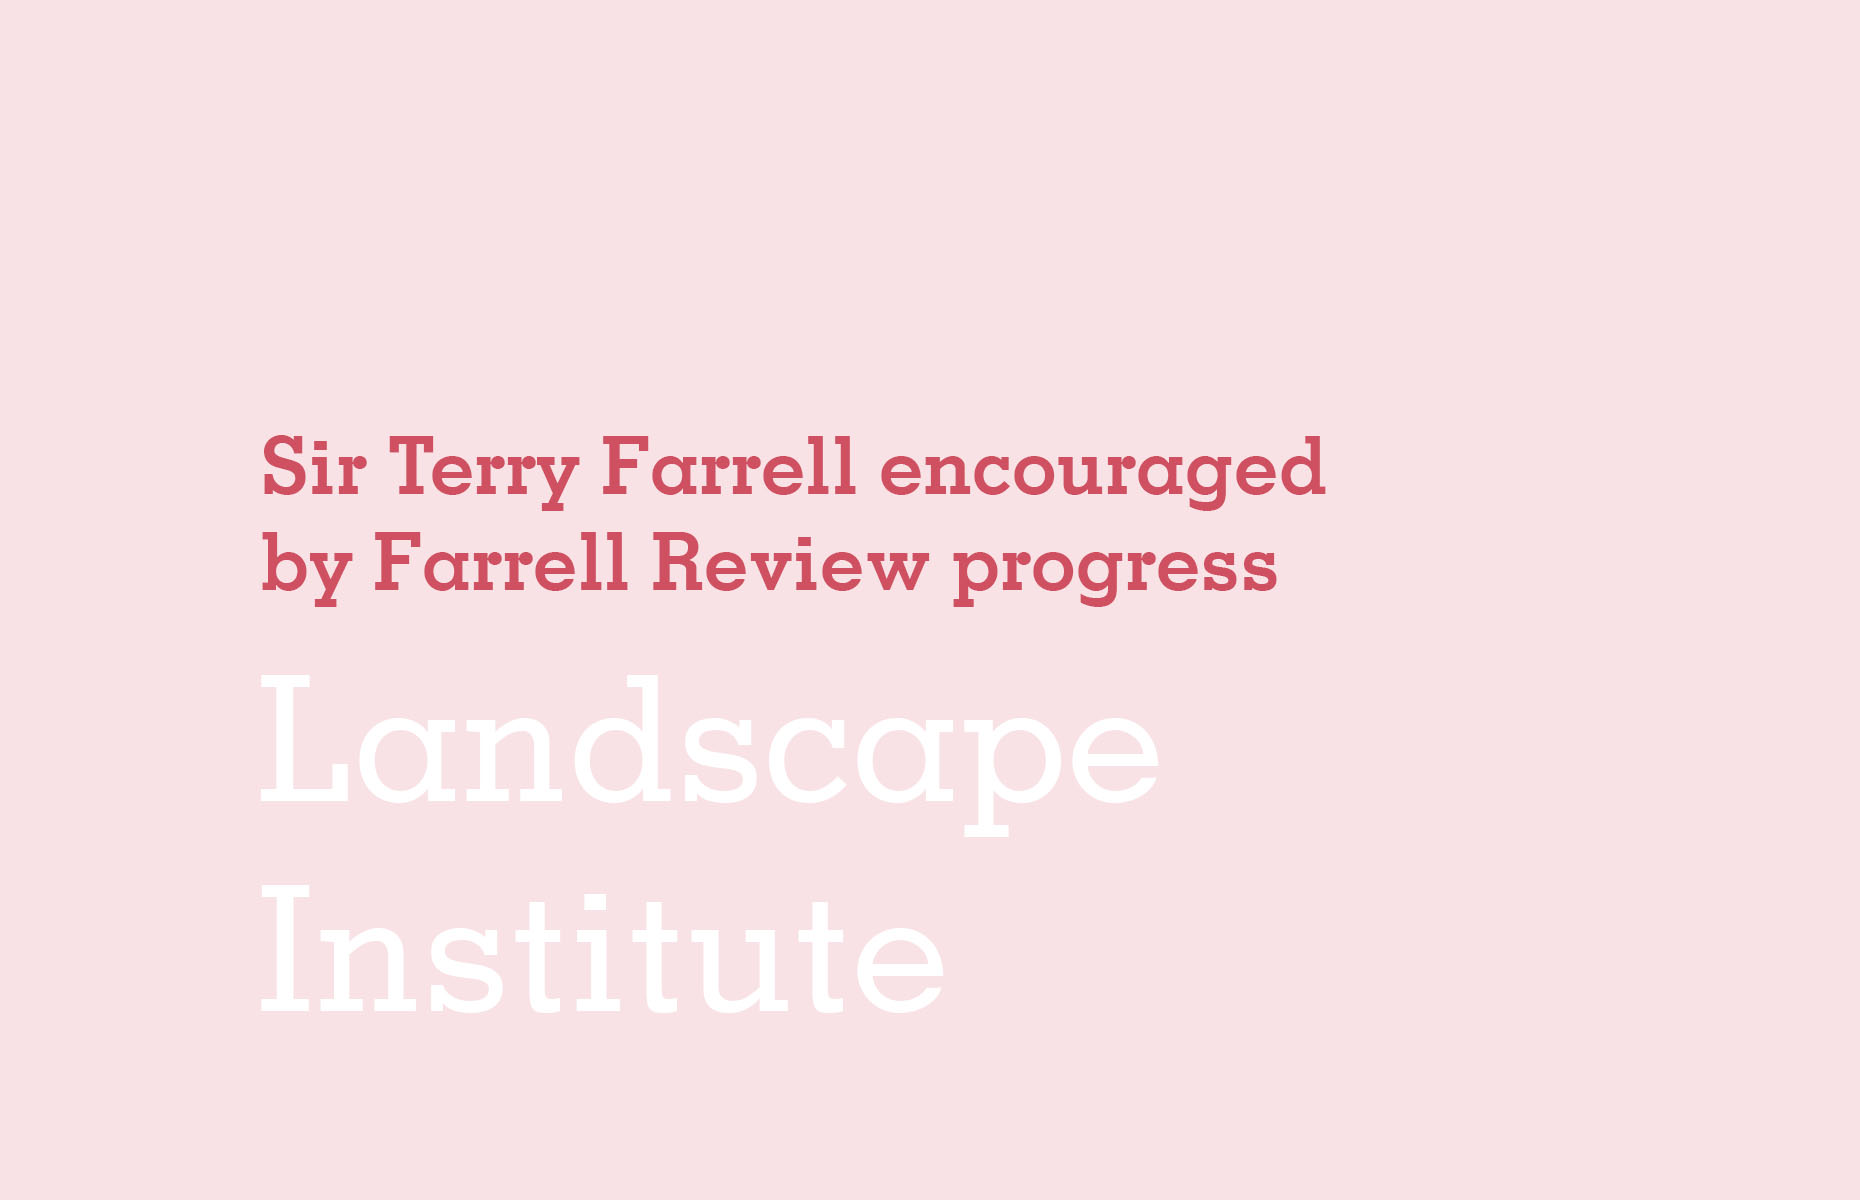 Sir Terry Farrell encouraged by Farrell Review progress